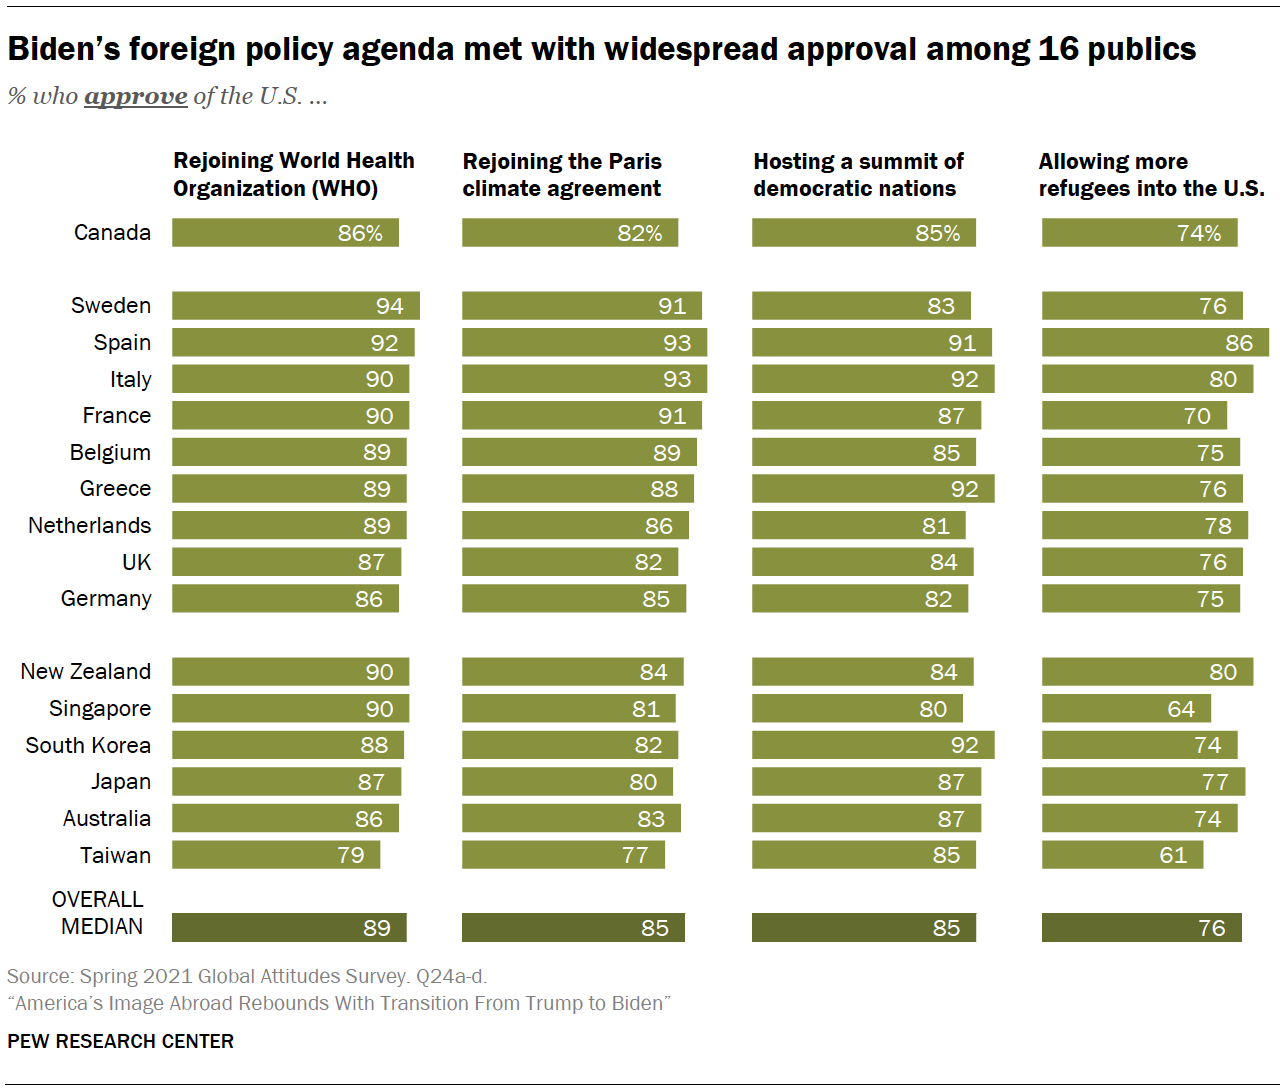 A bar chart showing that Biden’s foreign policy agenda is met with widespread approval among 16 publics